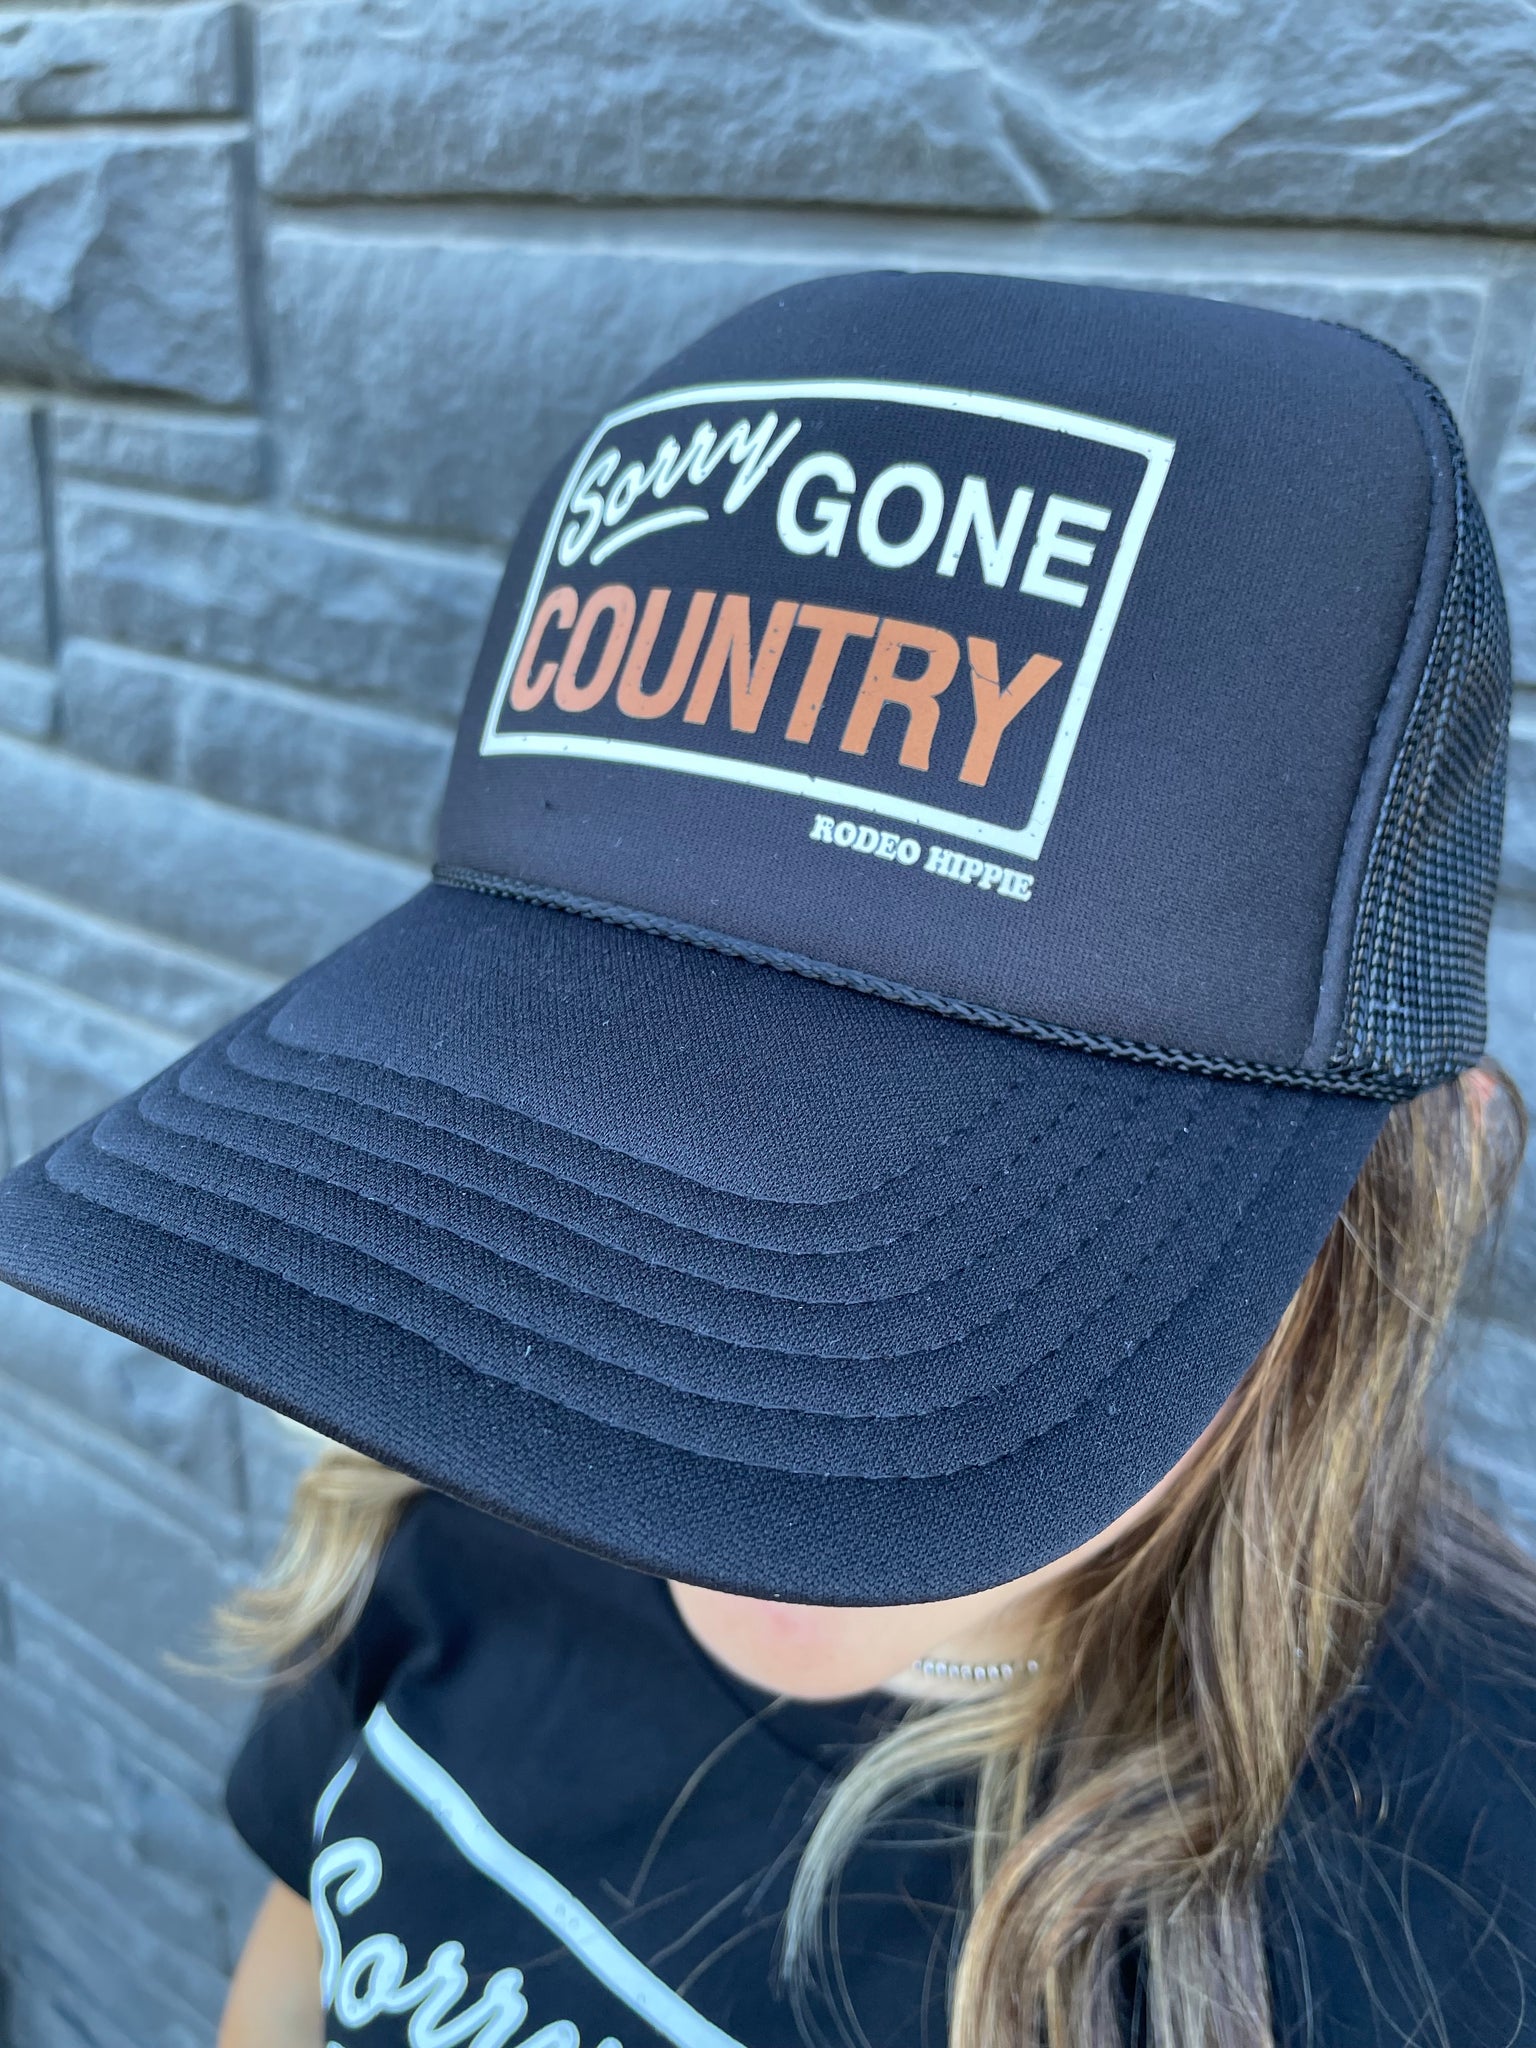 Sorry, Gone Country Trucker Hat